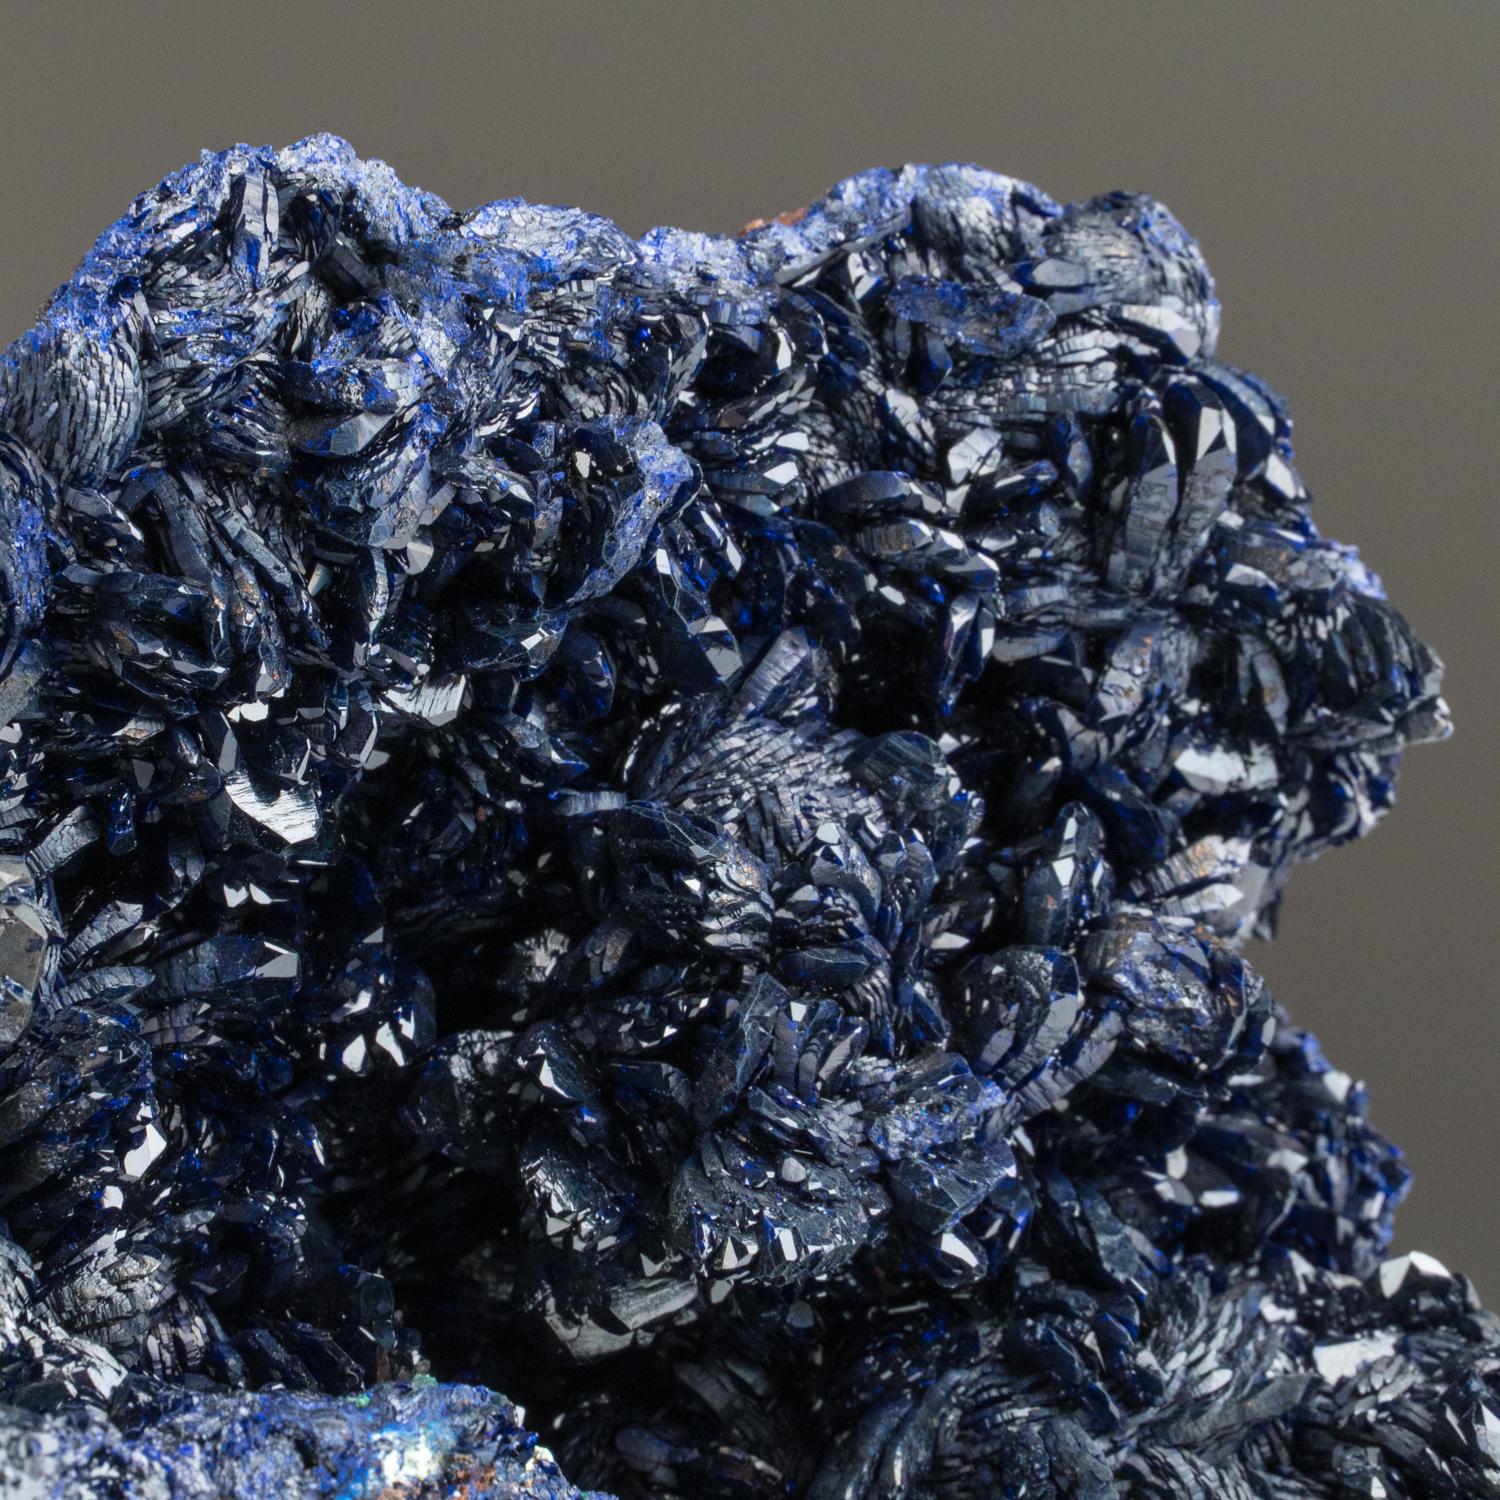 Azurite with Malachite from Liufengshan Mine, Guichi, Anhui Province, China.

Lustrous translucent vibrant royal blue crystals of azurite partially lining a gossan matrix with botryoidal green malachite.

2.5 lbs, Measures: 6 x 3 x 1.5 inches.